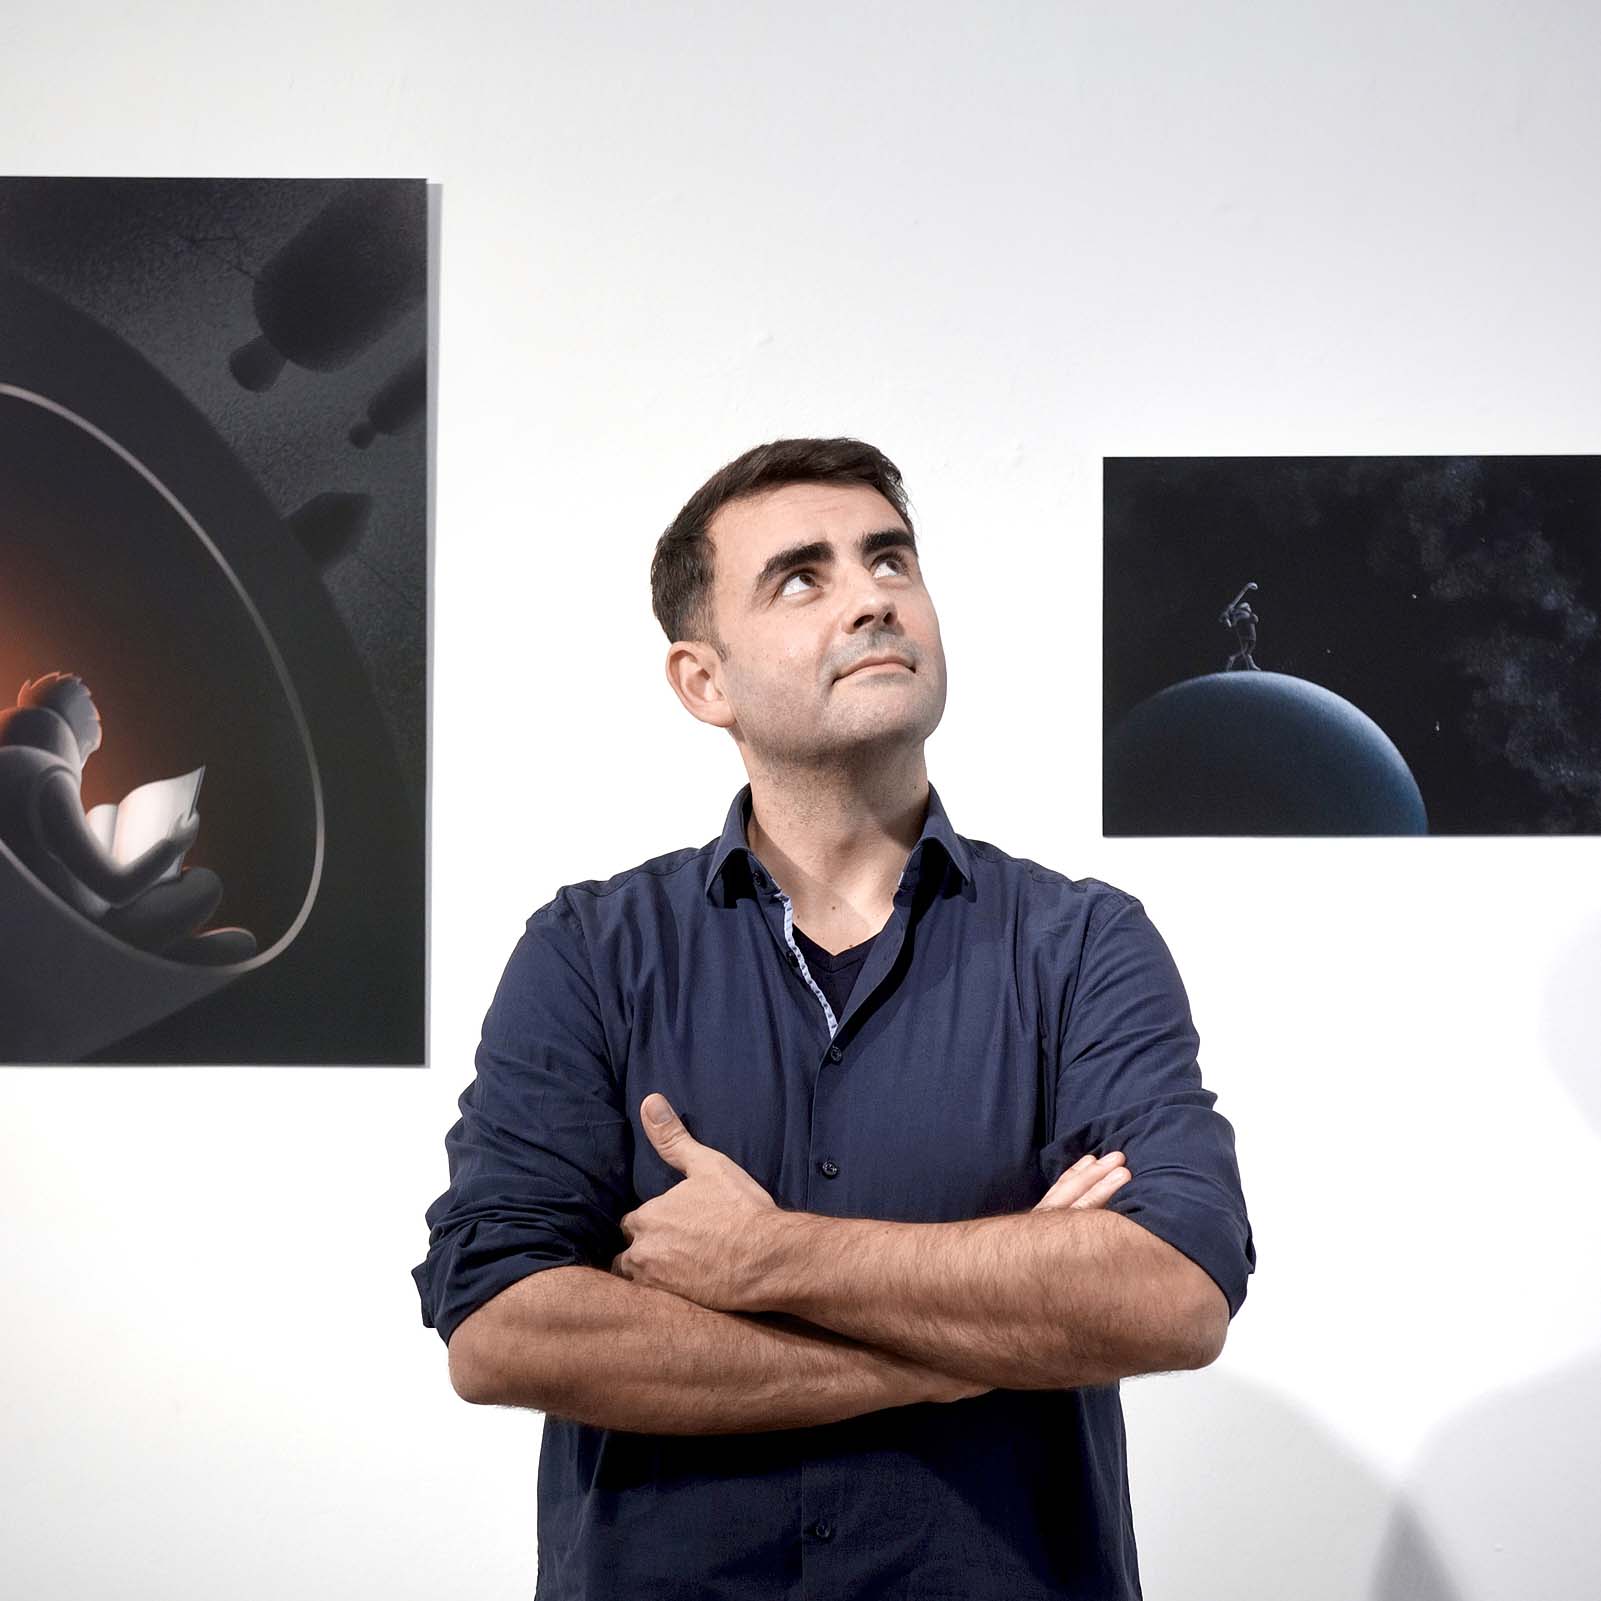 Marin Goleminov in front of paintings by him during the vernissage of his exhibition Space, Ink. Photo by Clemens Fabry